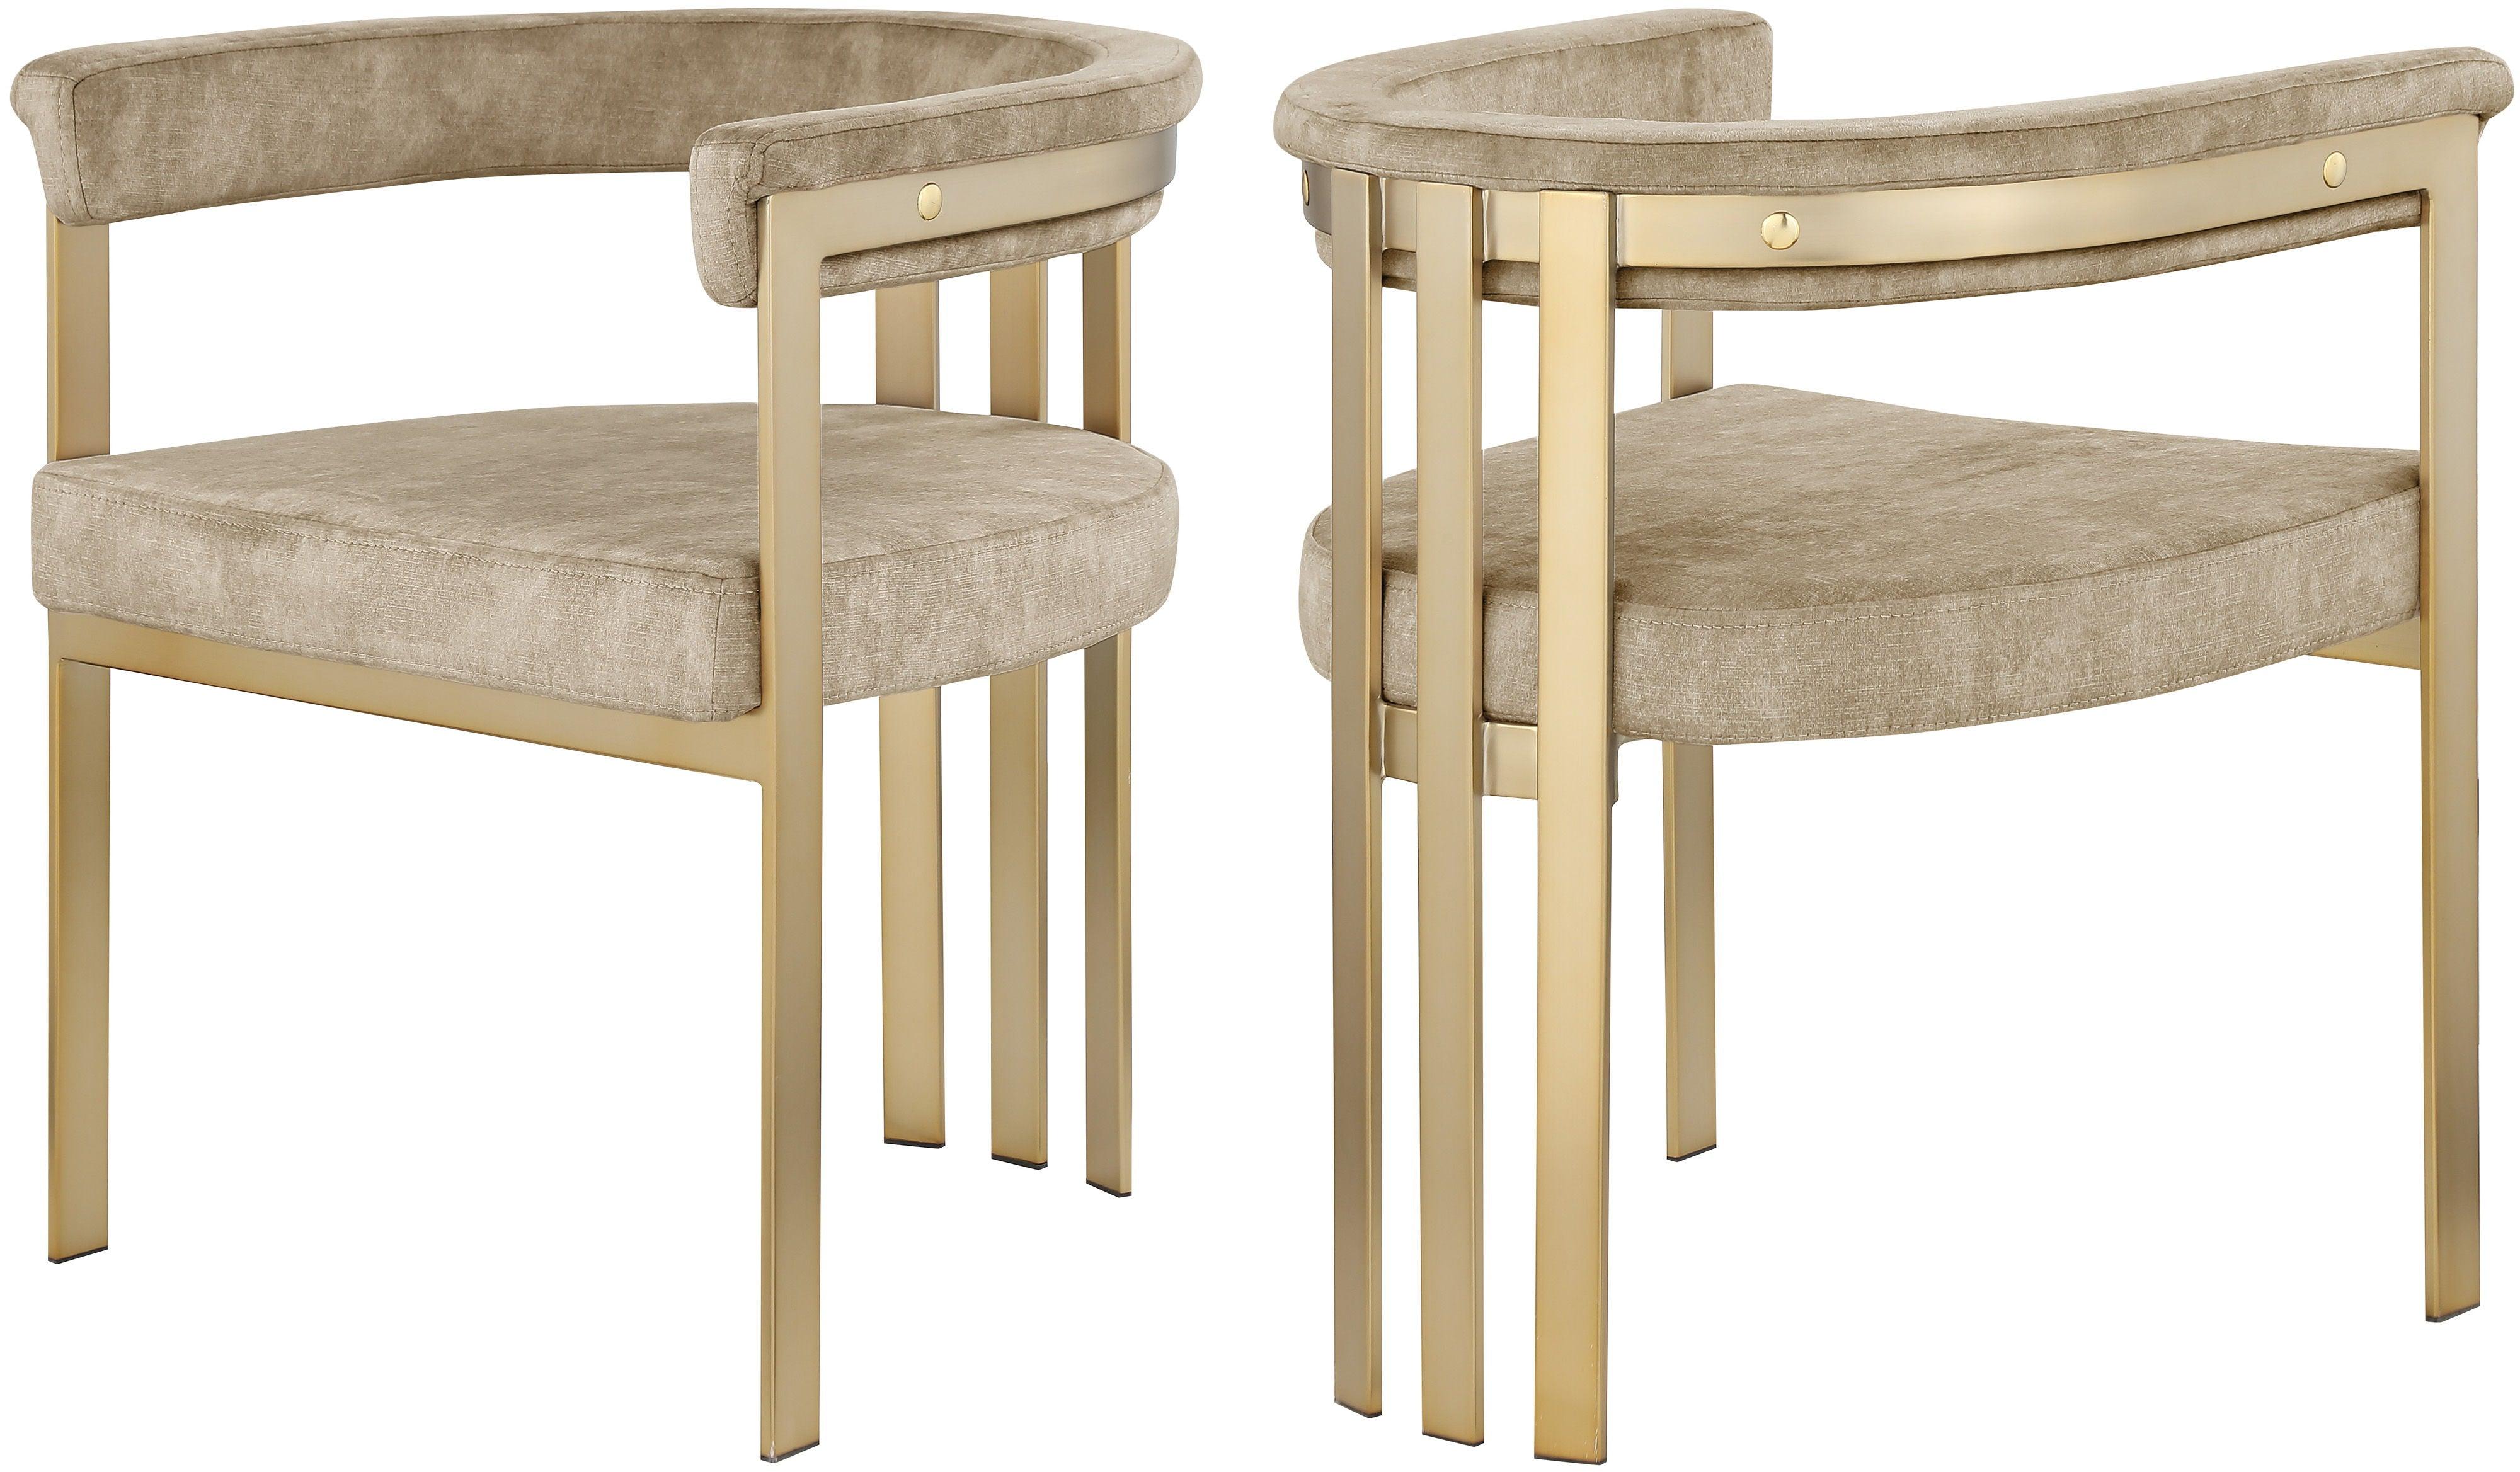 Meridian Furniture - Marcello - Dining Chair - Beige - 5th Avenue Furniture